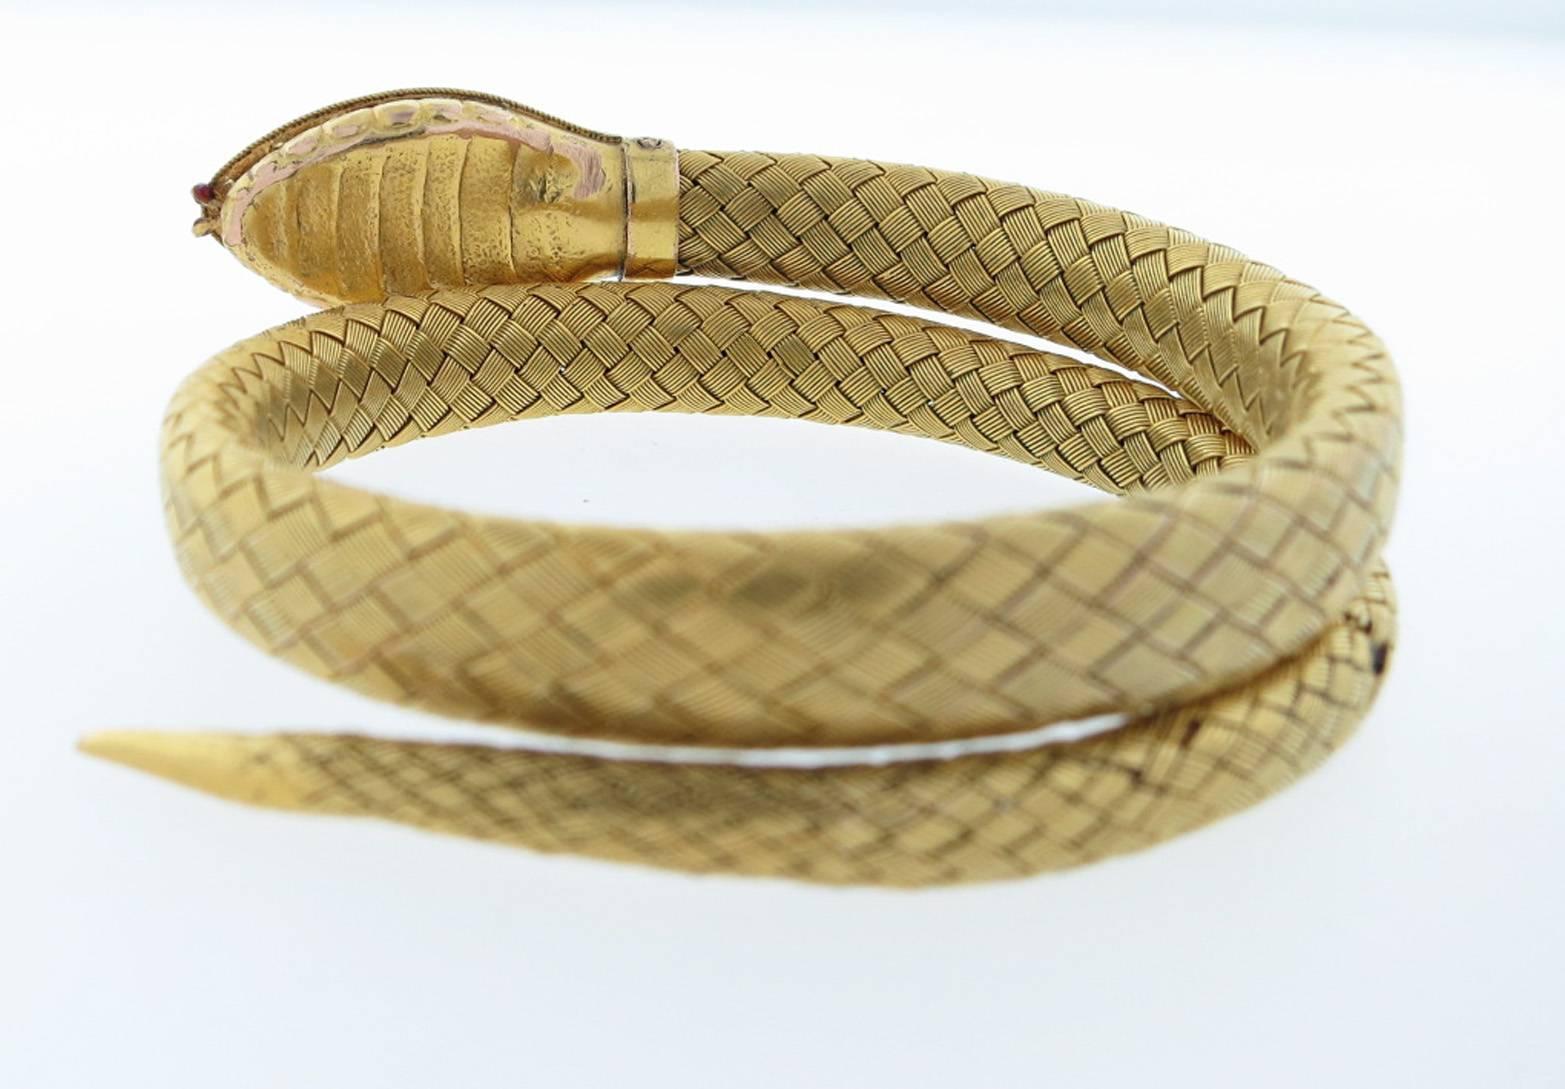 Wrap around woven 14kt. yellow gold snake braclelet that wraps around the wrist comfortably and will fit most wrists. The snakes head is enameled in four color enamel , the eyes are set with rose cut diamonds. Very fine condition given it's age